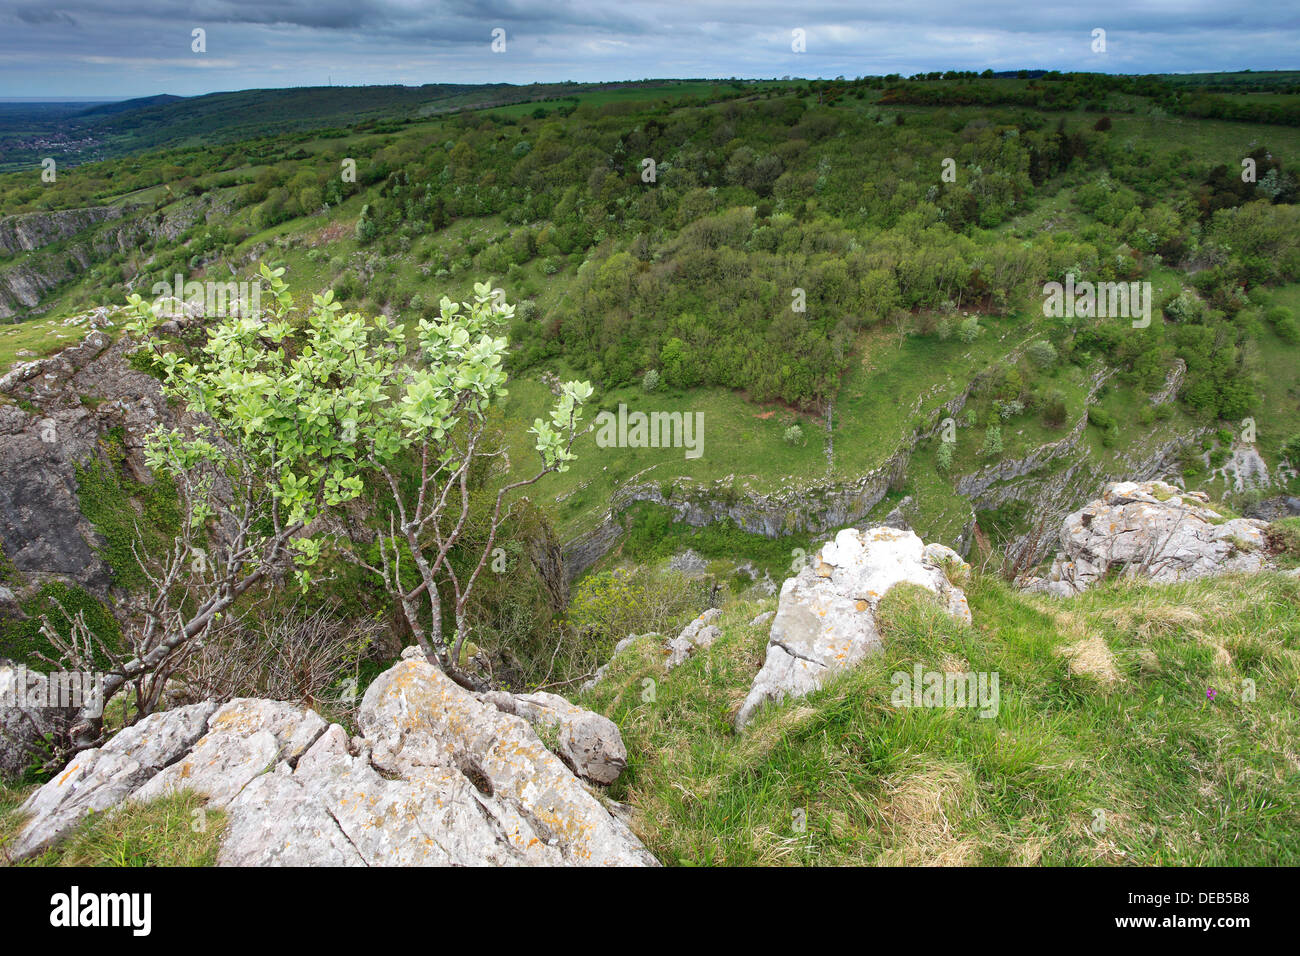 Summer view over the Limestone cliffs of Cheddar Gorge, Mendip Hills, Somerset County, England, UK Stock Photo